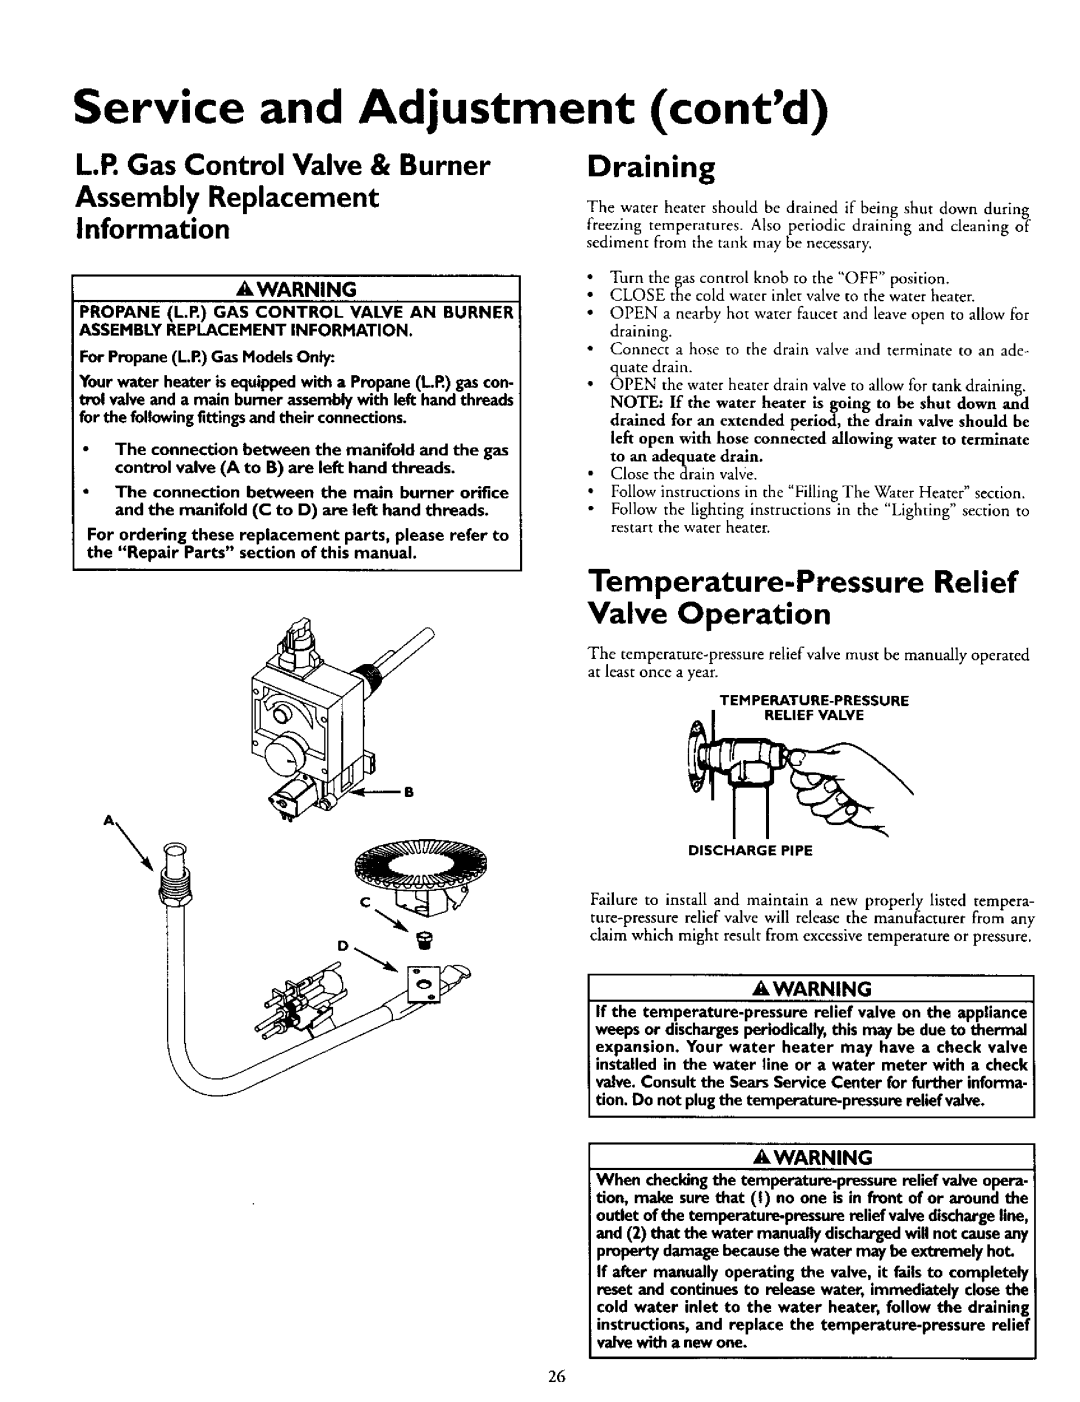 Kenmore 153.335845 Service and Adjustment contd, L.P. Gas Control Valve & Burner, Assembly Replacement Information 